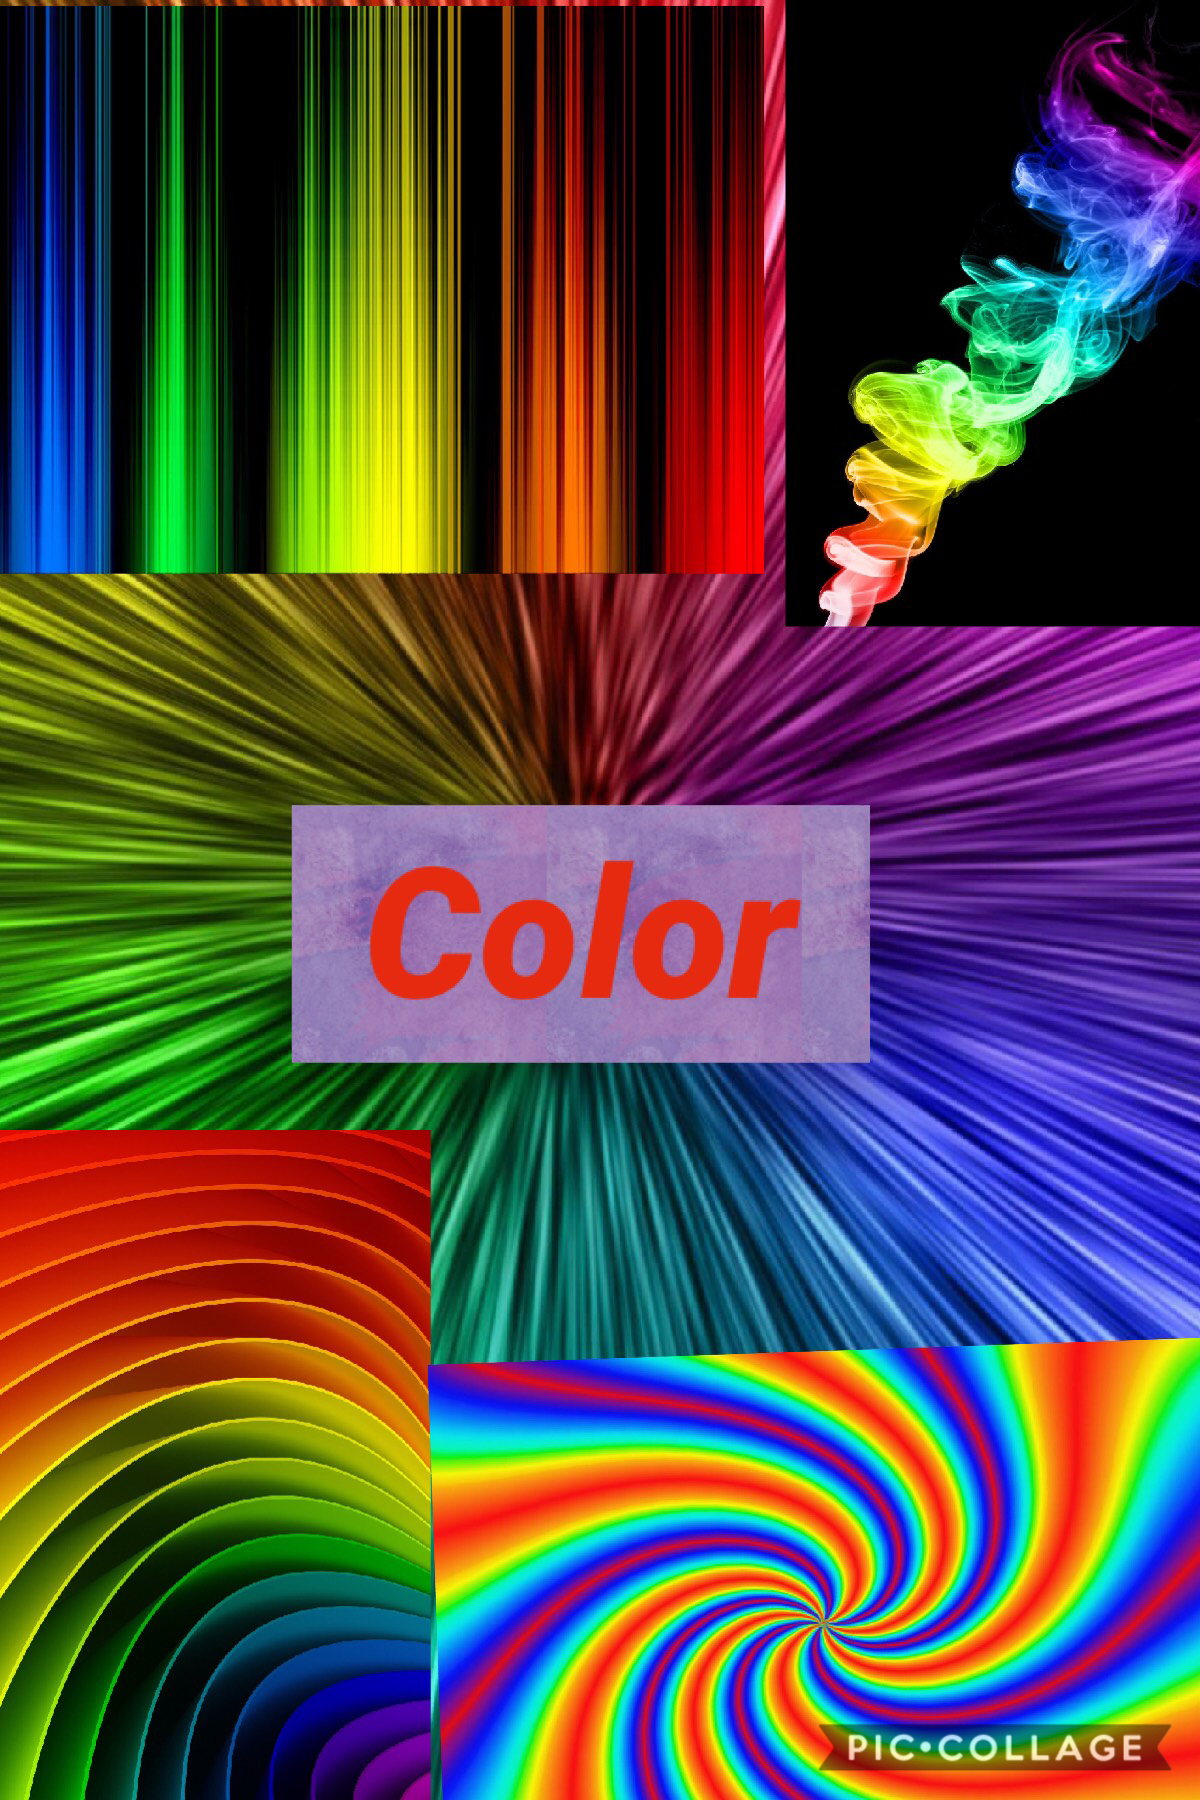 Colors are beautiful, I’m glad we all have color in our world it’s awesome 